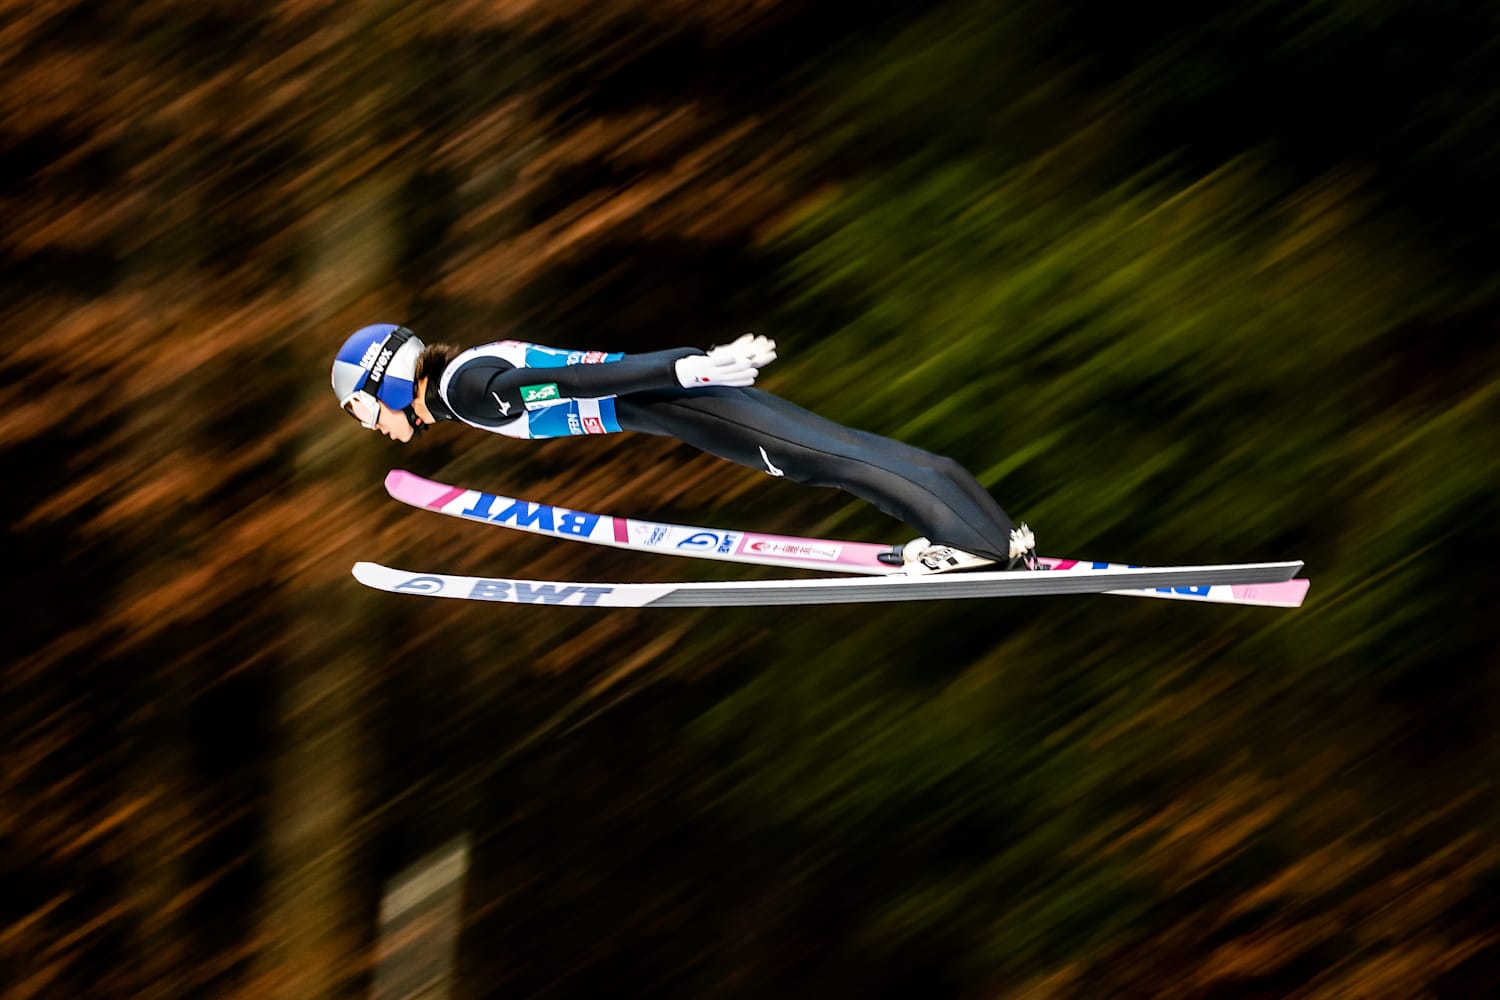 5 greatest ski jumpers in terms of style and distance